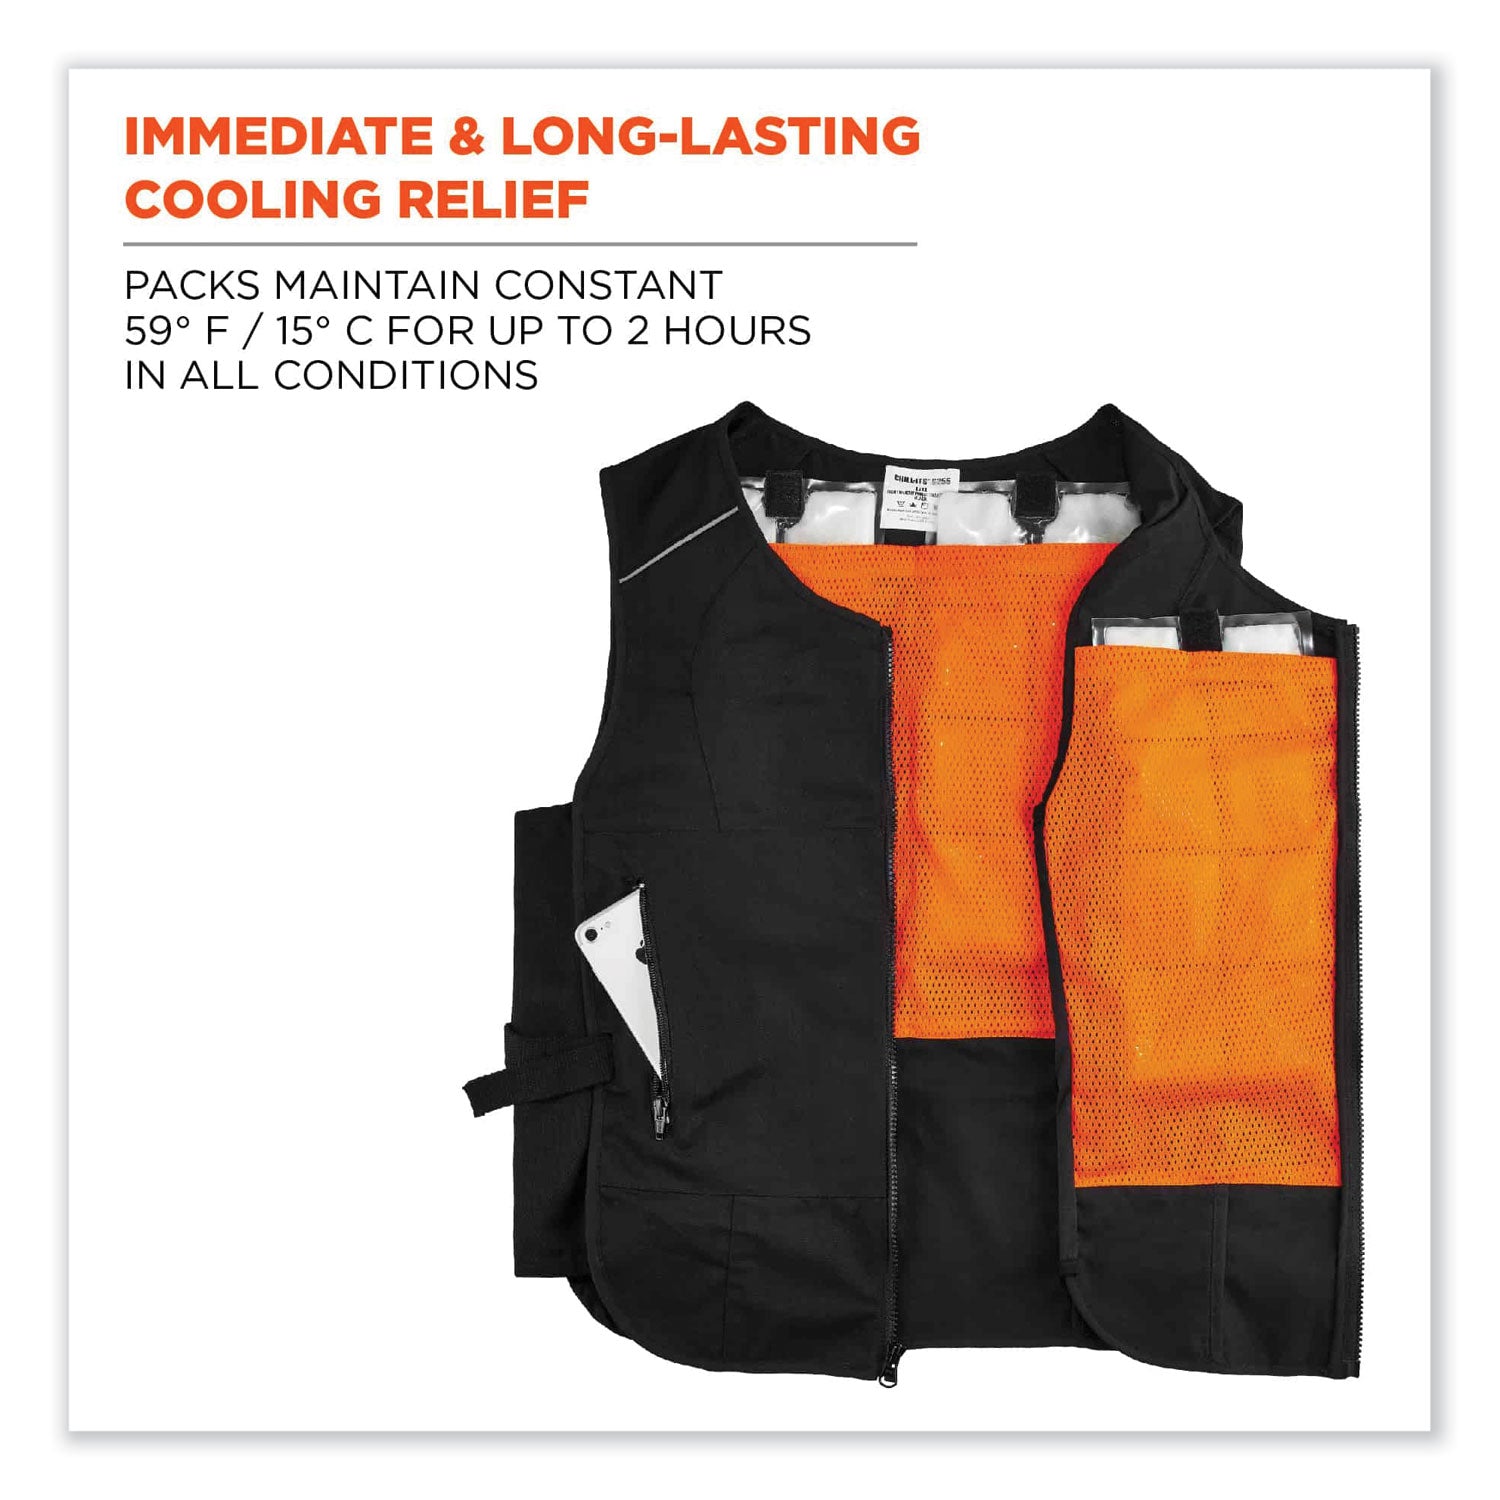 chill-its-6260-lightweight-phase-change-cooling-vest-w-packs-cotton-polyester-small-med-black-ships-in-1-3-business-days_ego12133 - 2